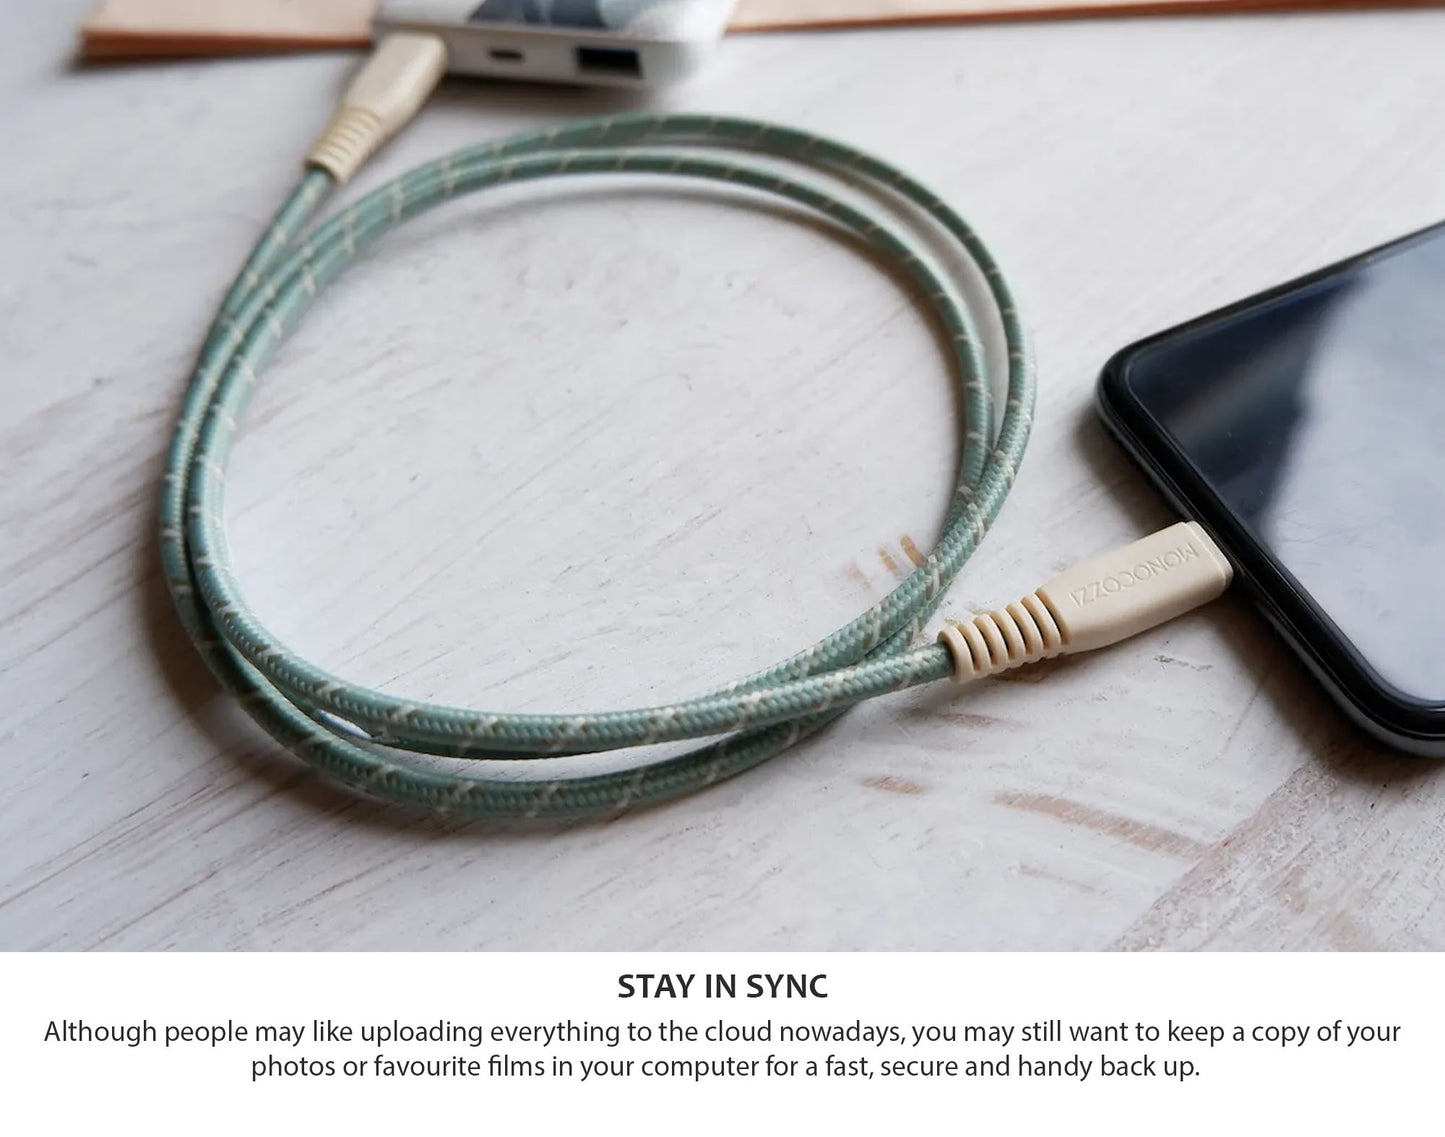 Monocozzi Motif Braided USB-C to Lightning Cable ( 100cm ) - Green (Barcode: 4895199105348 )